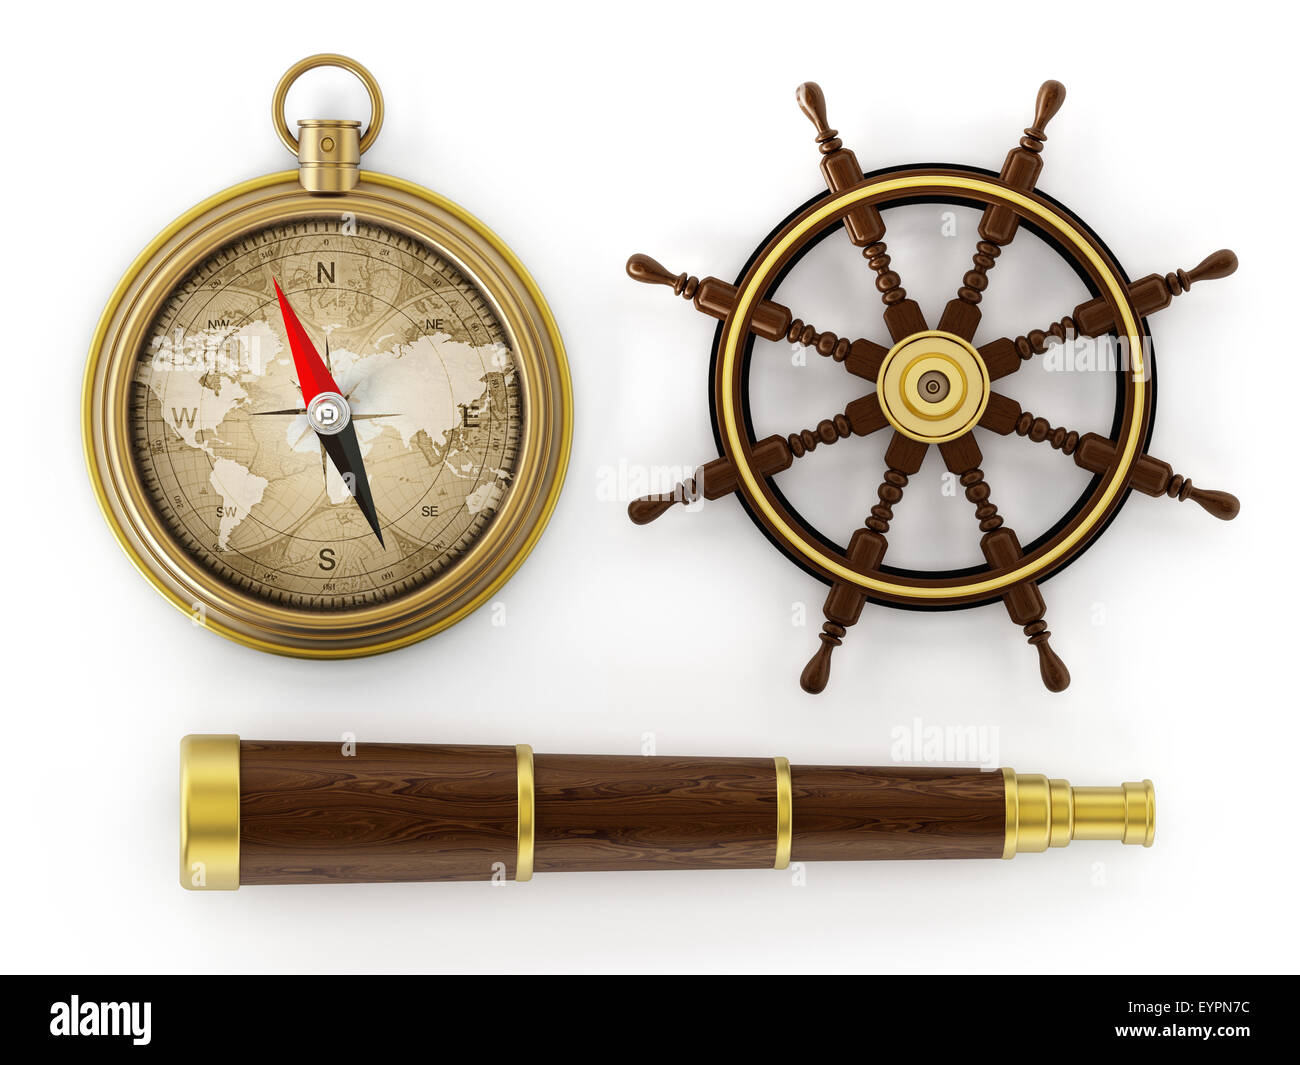 Brass & Bronze - How Do I Tell The Difference ? photo - Compass Marine How  To photos at